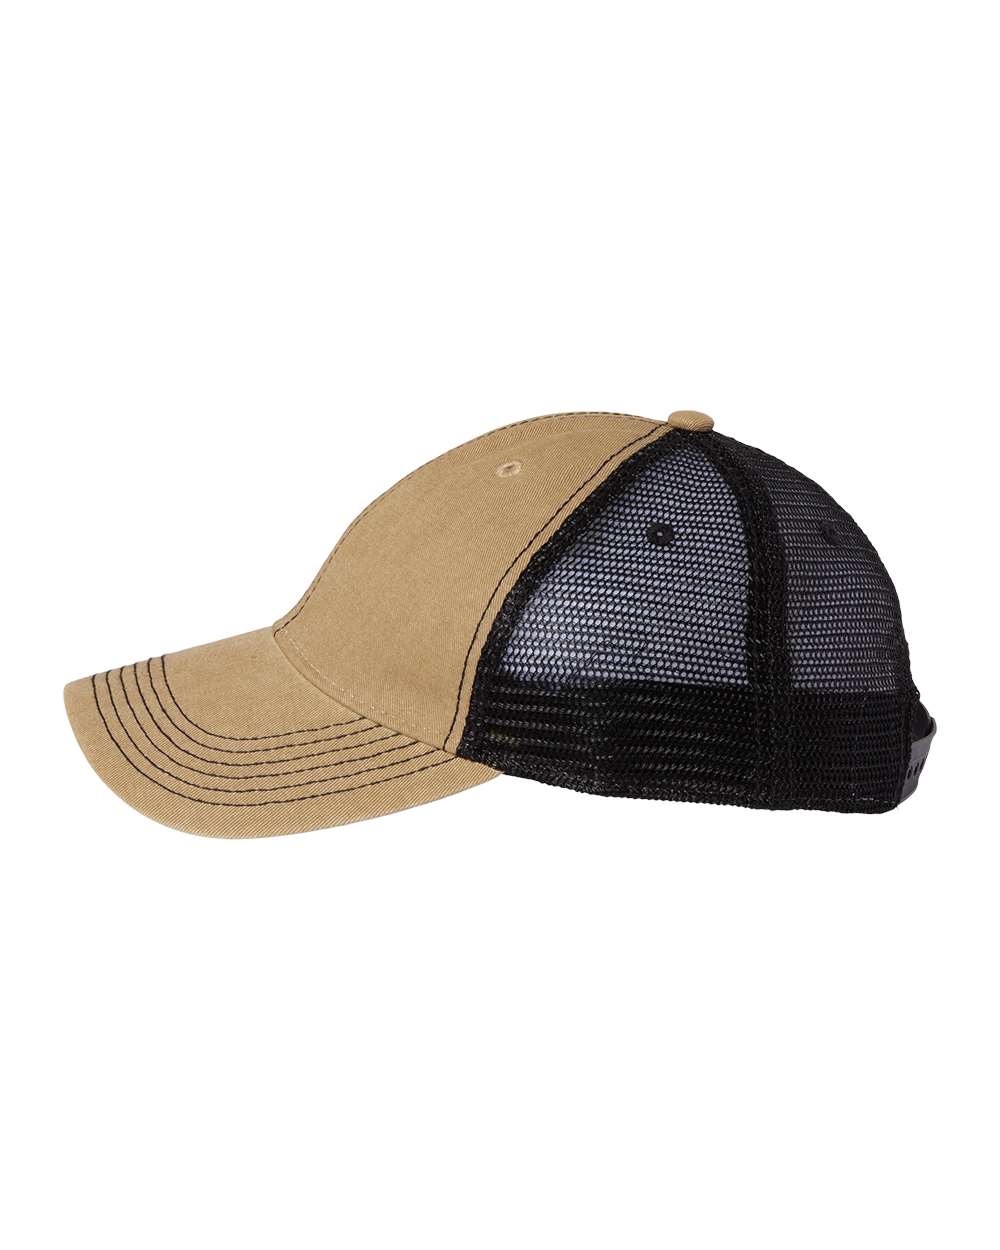 SXS Funny Legacy Off-Road Hat - Goats Trail Off-Road Apparel Company